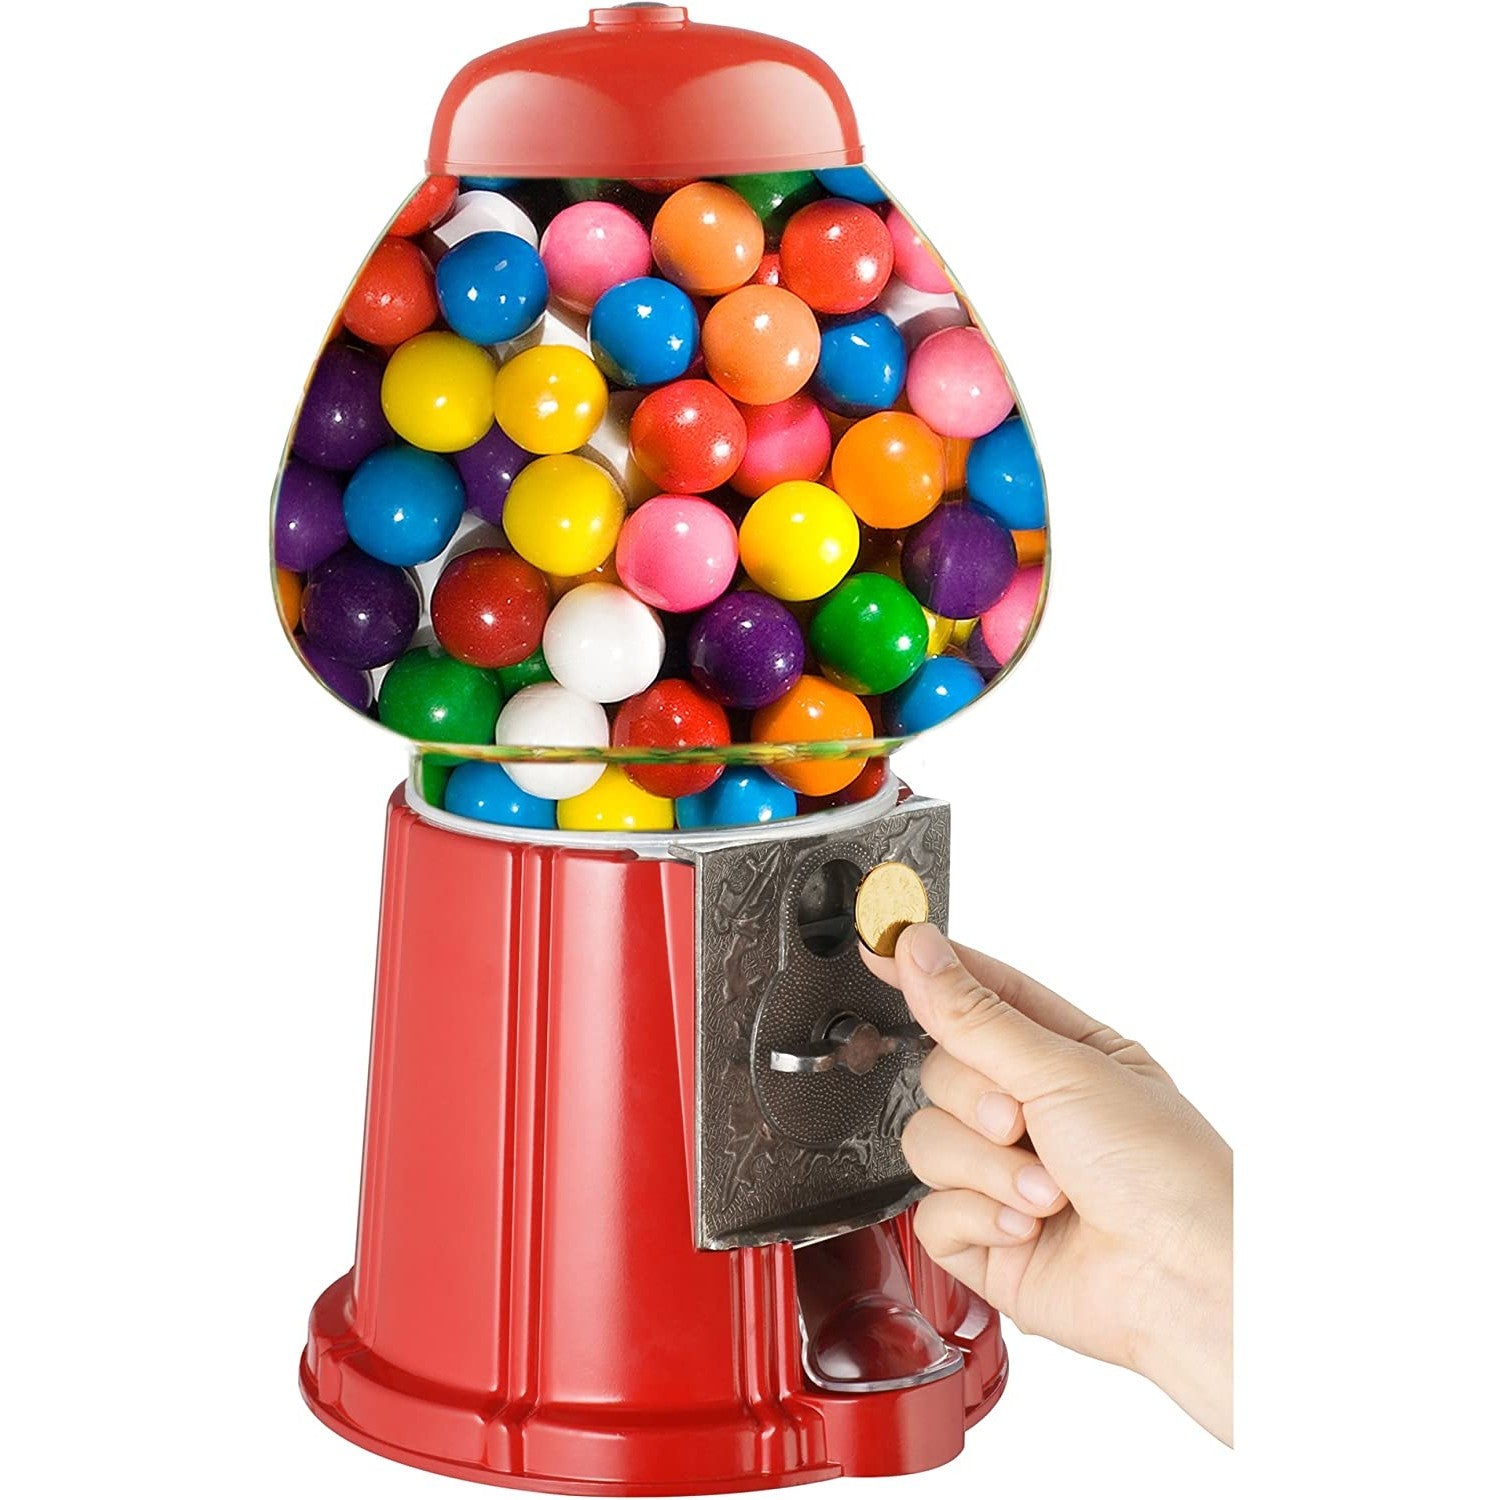 Get your candy fix and more with this old fashioned gumball machine –